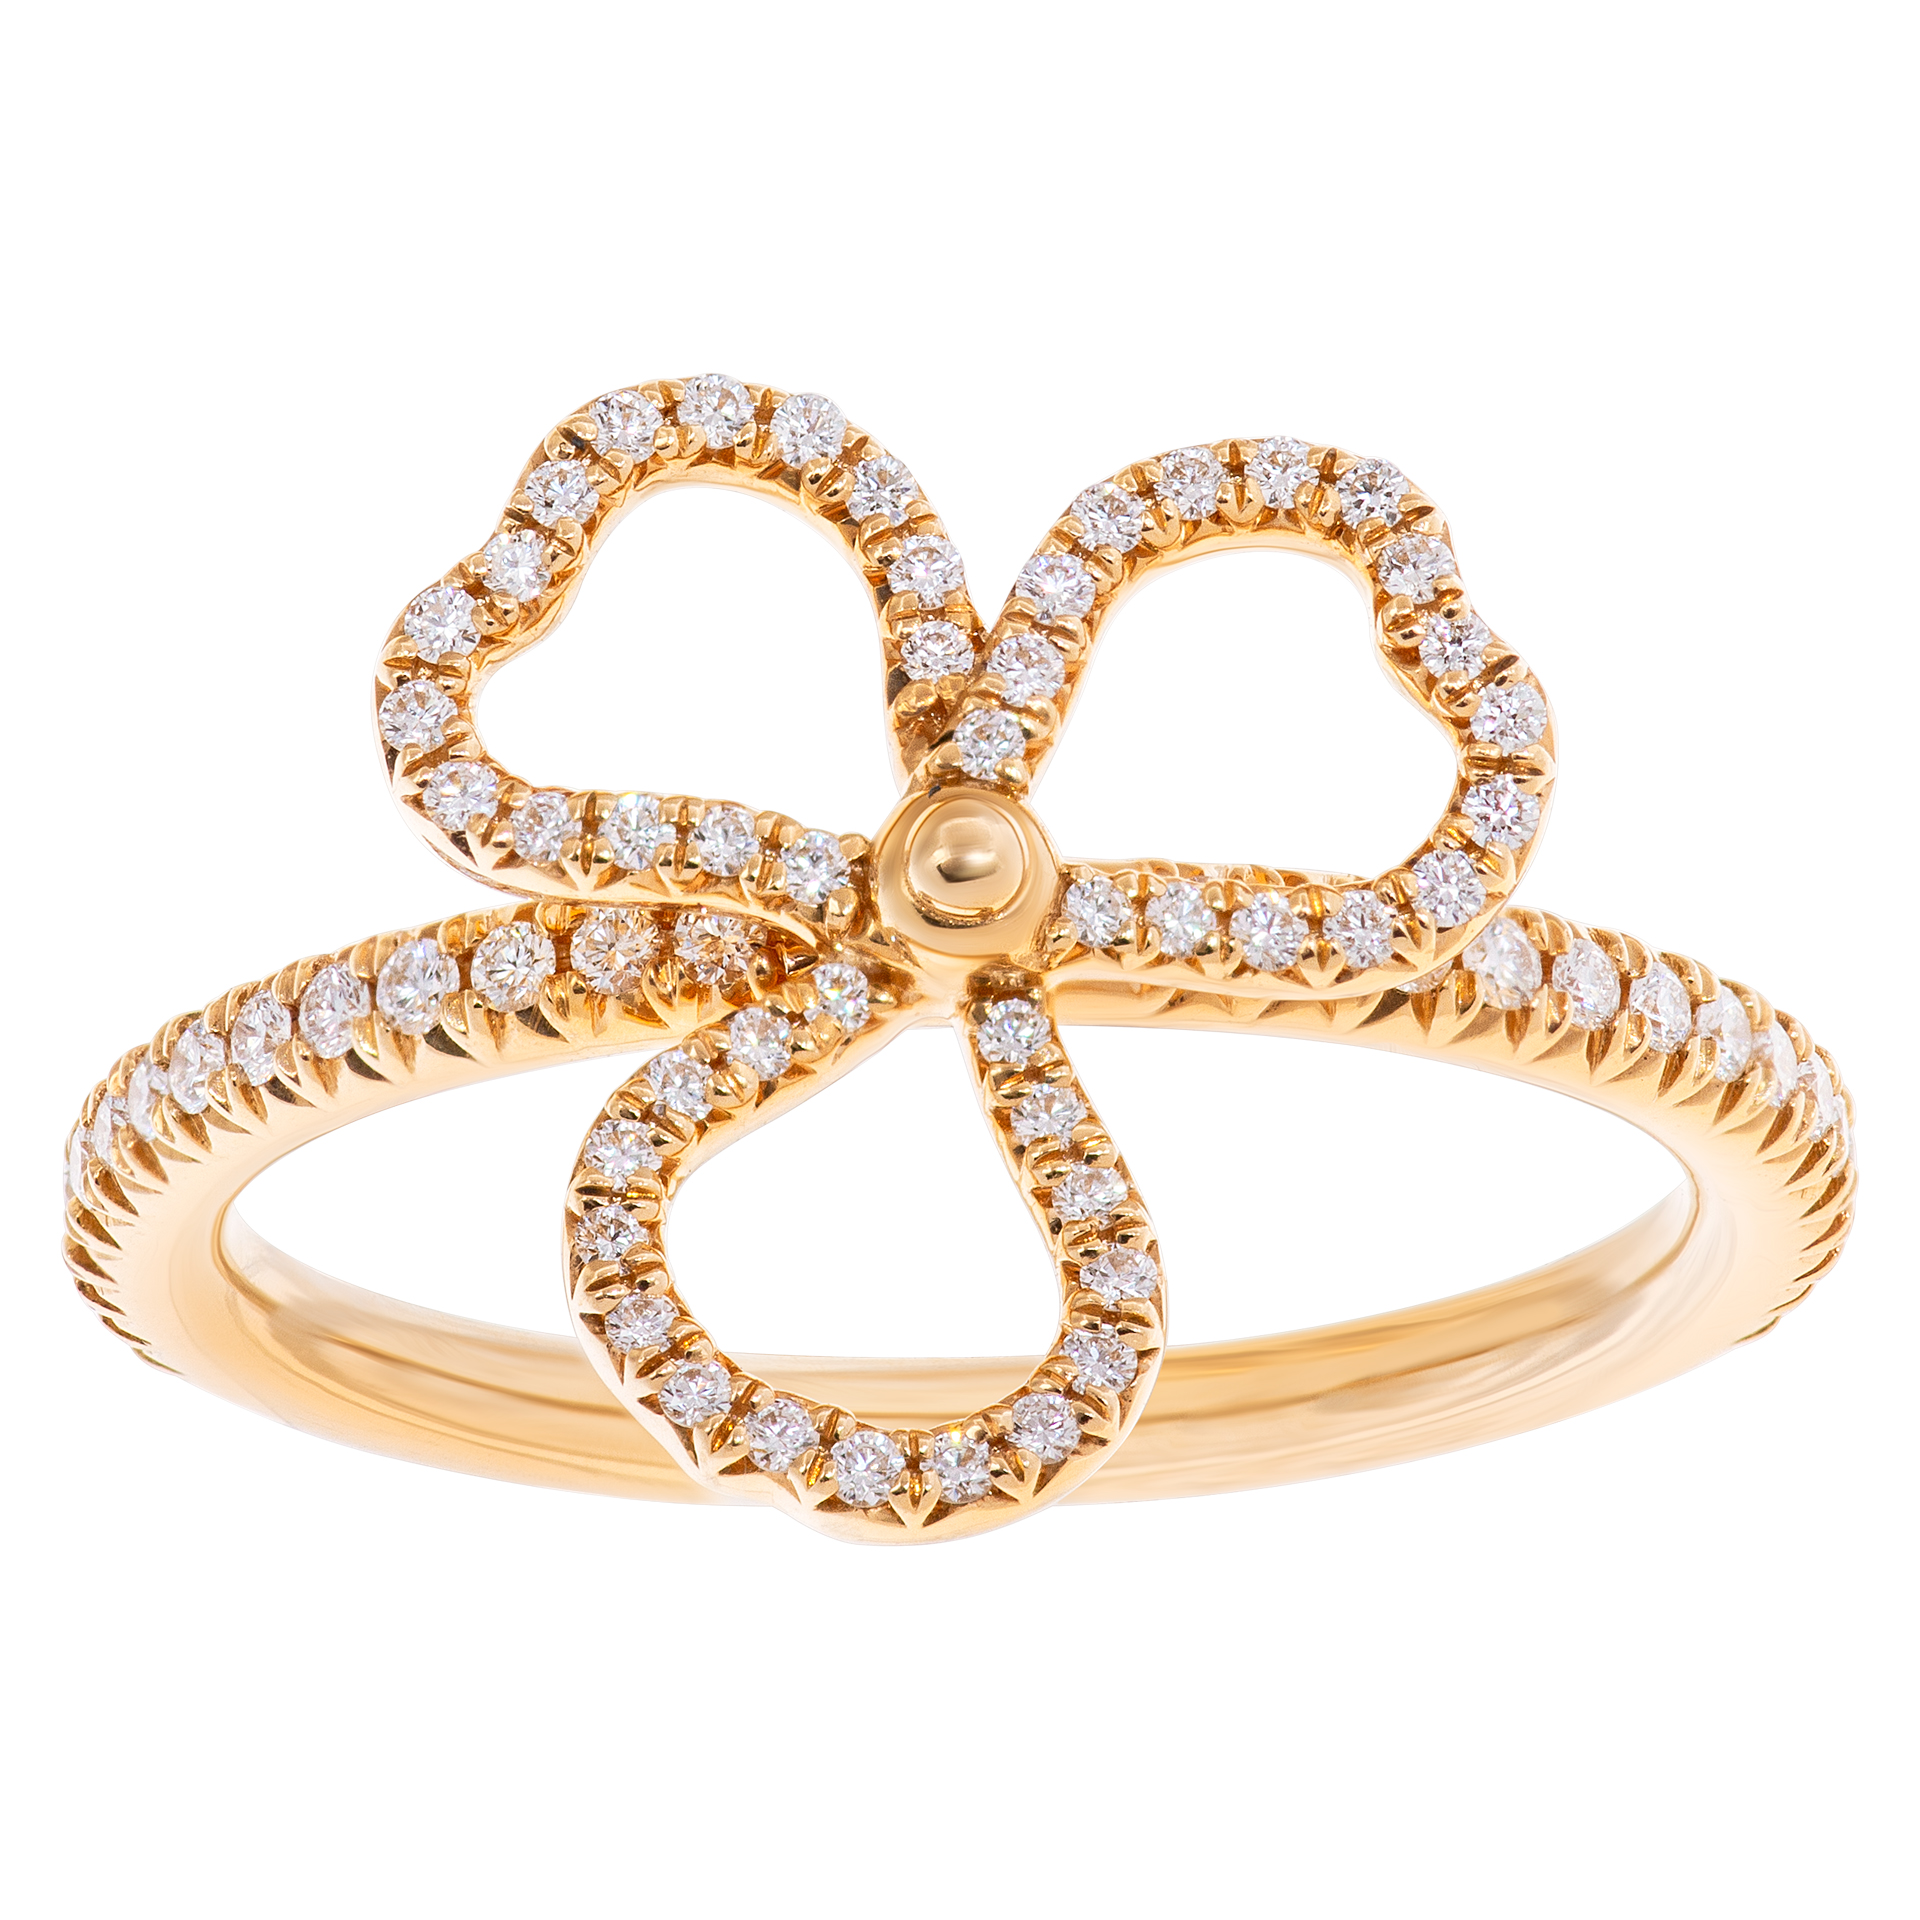 Tiffany & Co. "Paper Flowers" collection, open 3 leaves clover ring with 0.14 carat in diamonds, set in 18k rose gold